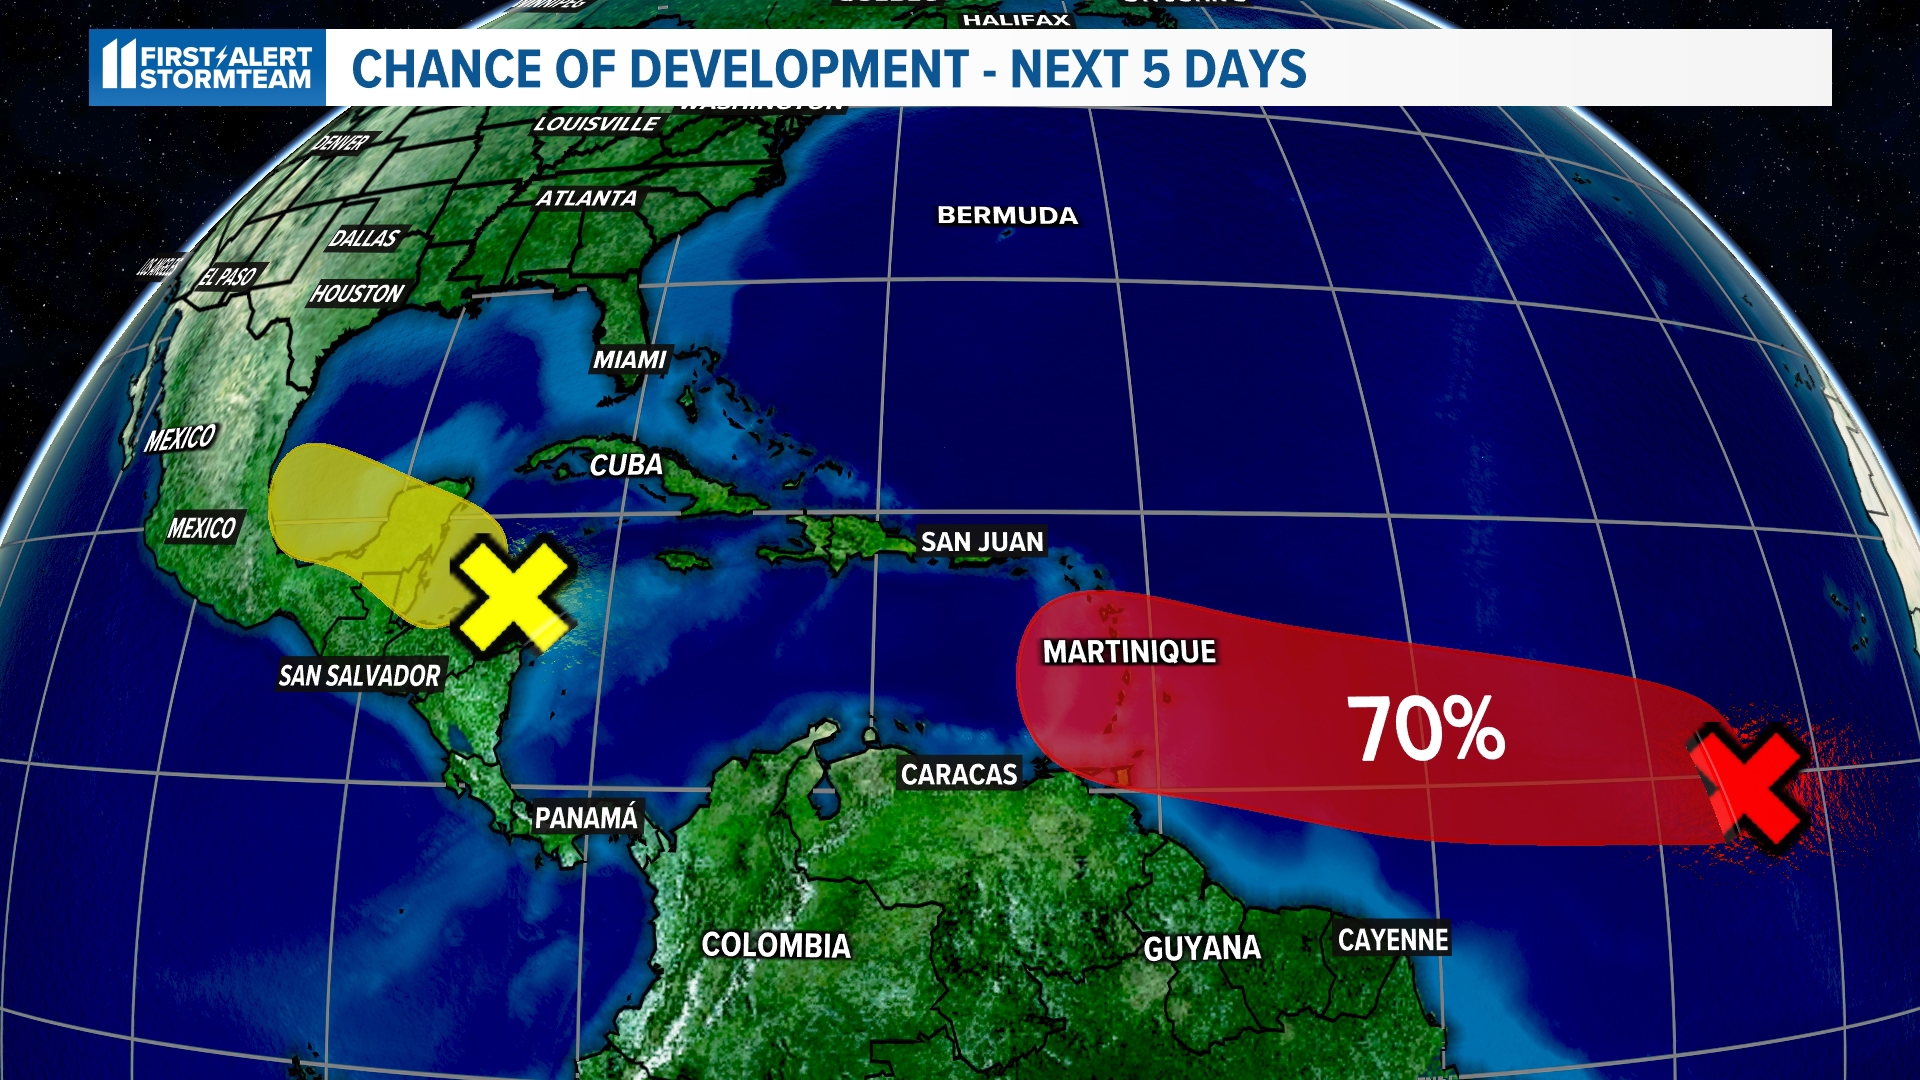 Over the next five days, there is a 70% chance of tropical development.